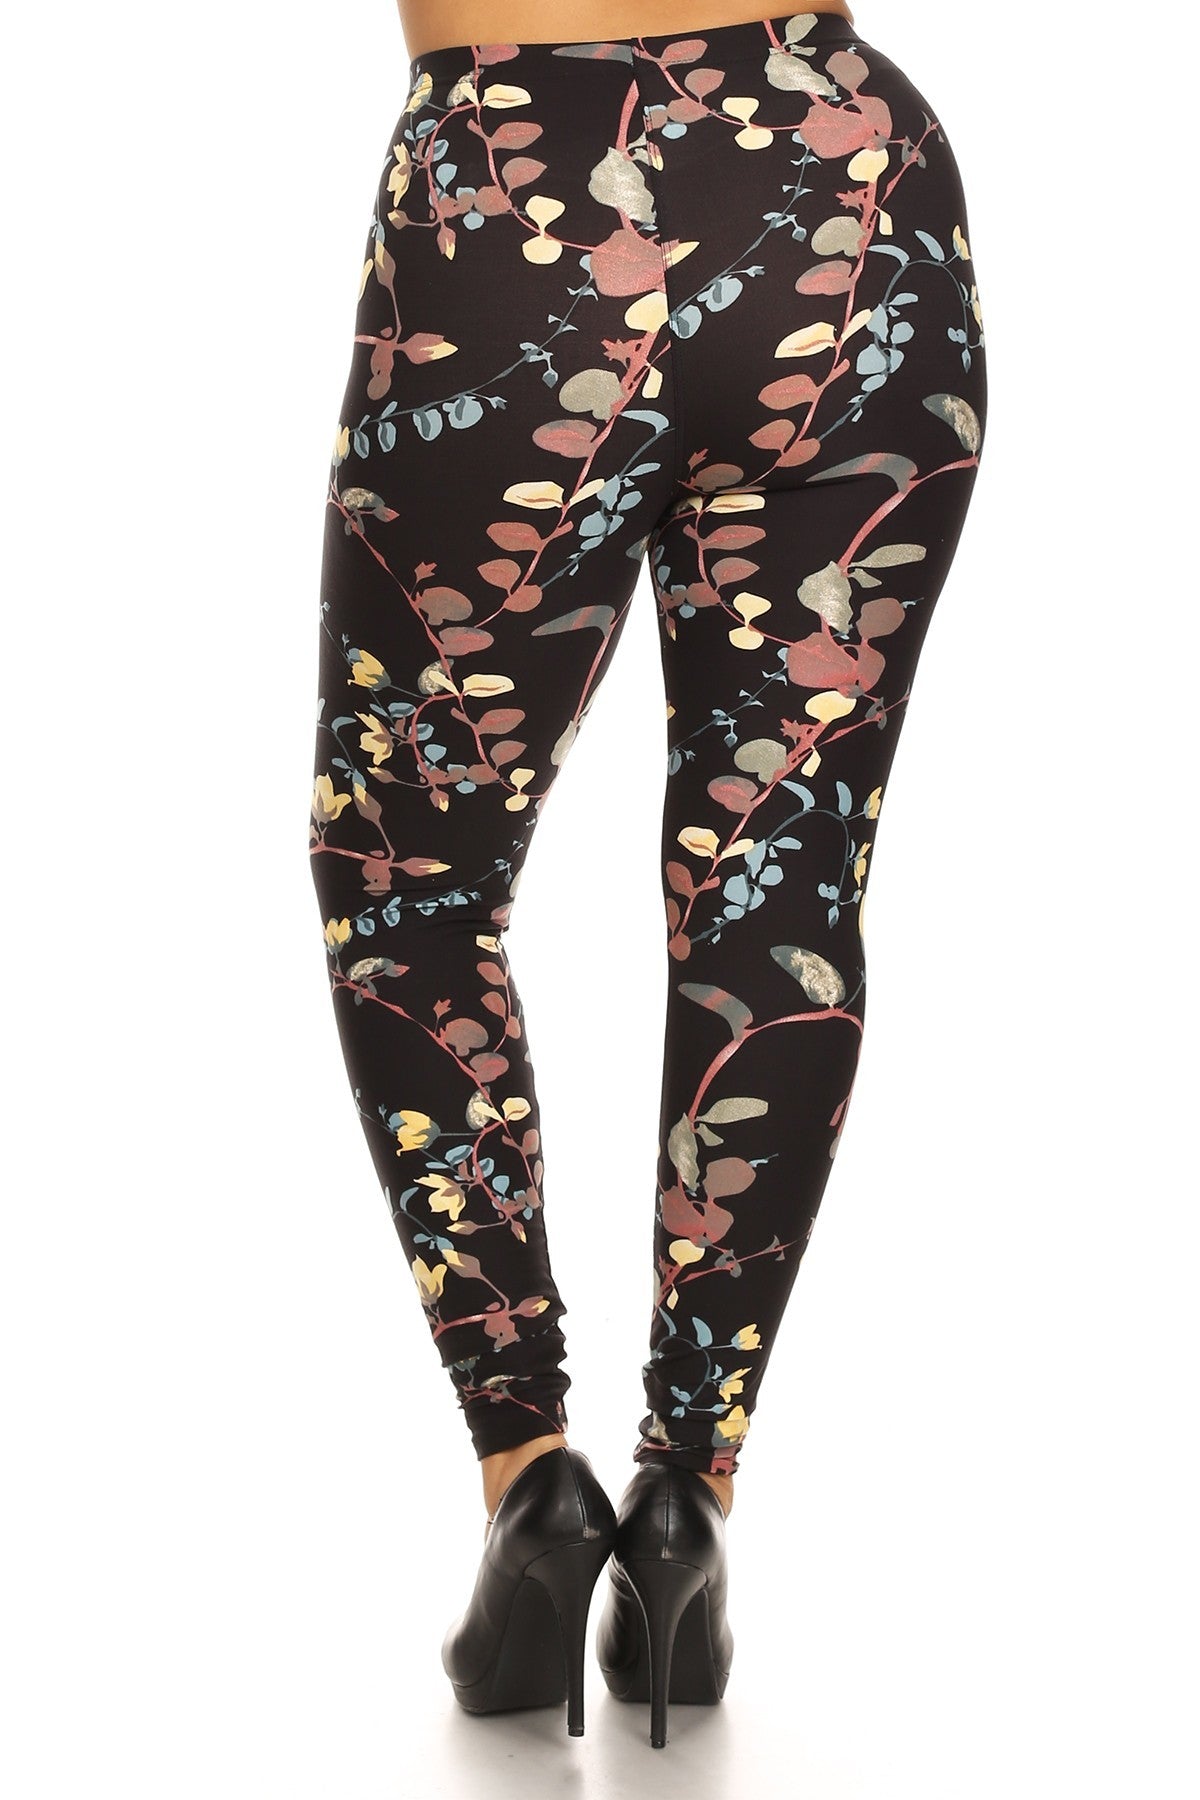 Plus Size Floral Print, Full Length Leggings In A Slim Fitting Style With A Banded High Waist 2 king-general-store-5710.myshopify.com